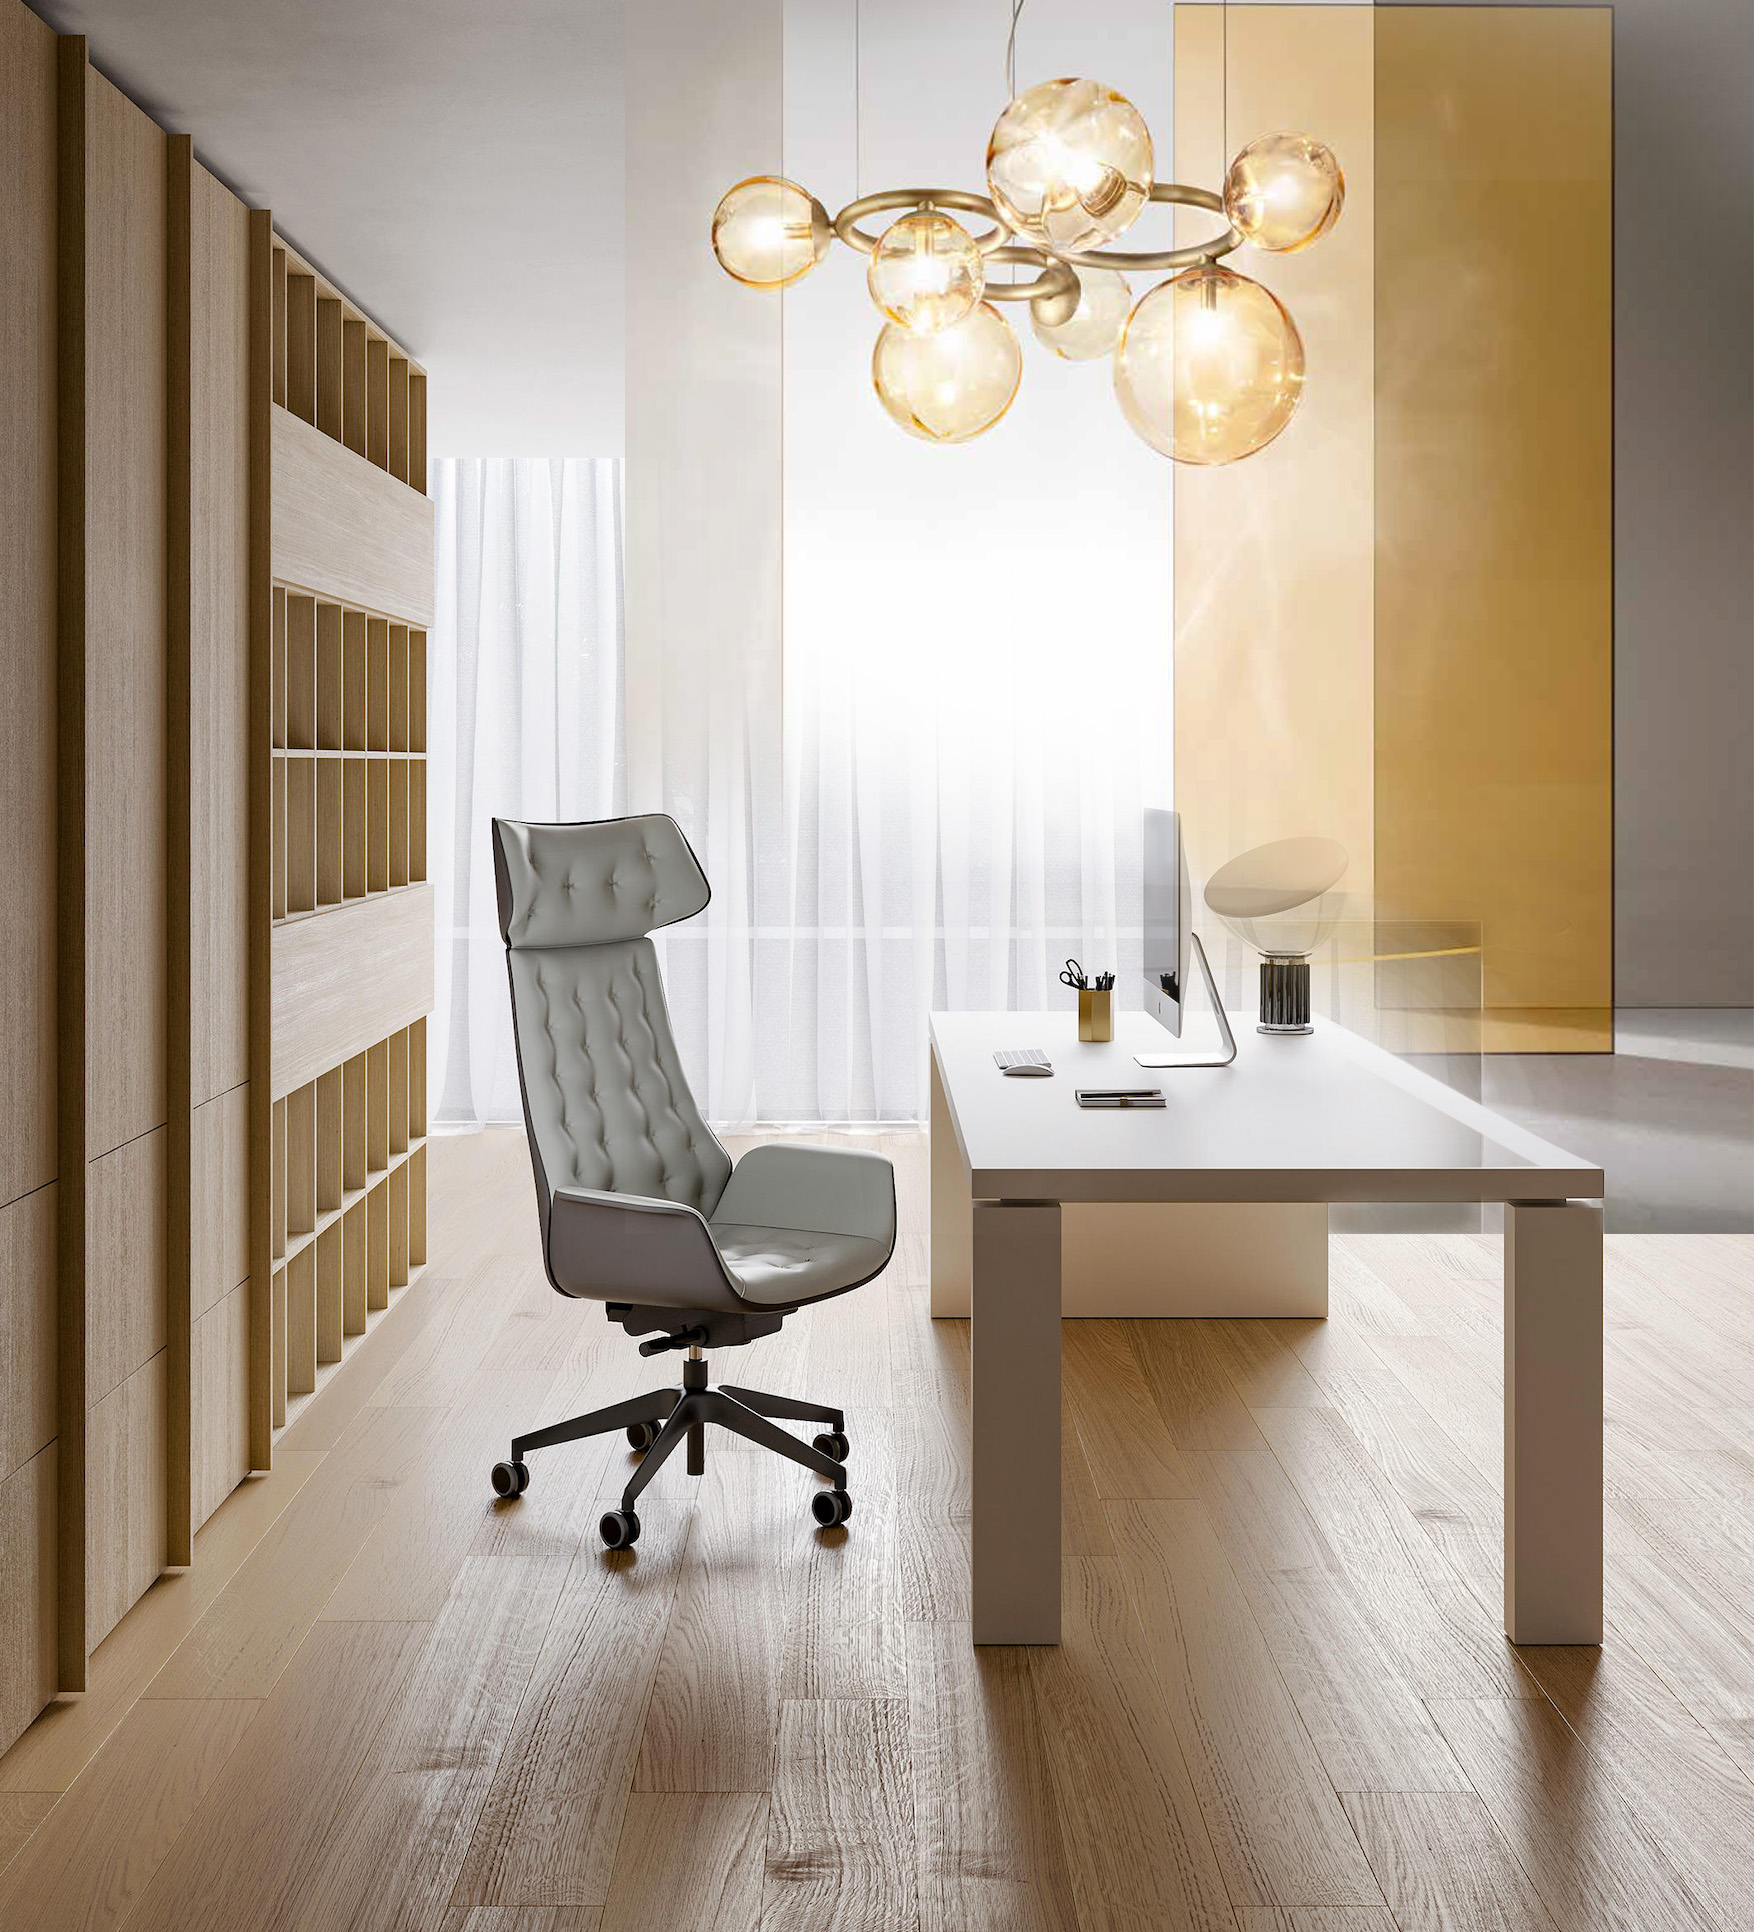 ultra executive chair is the modern posh high end chair for office desks board room tables and executive home offices